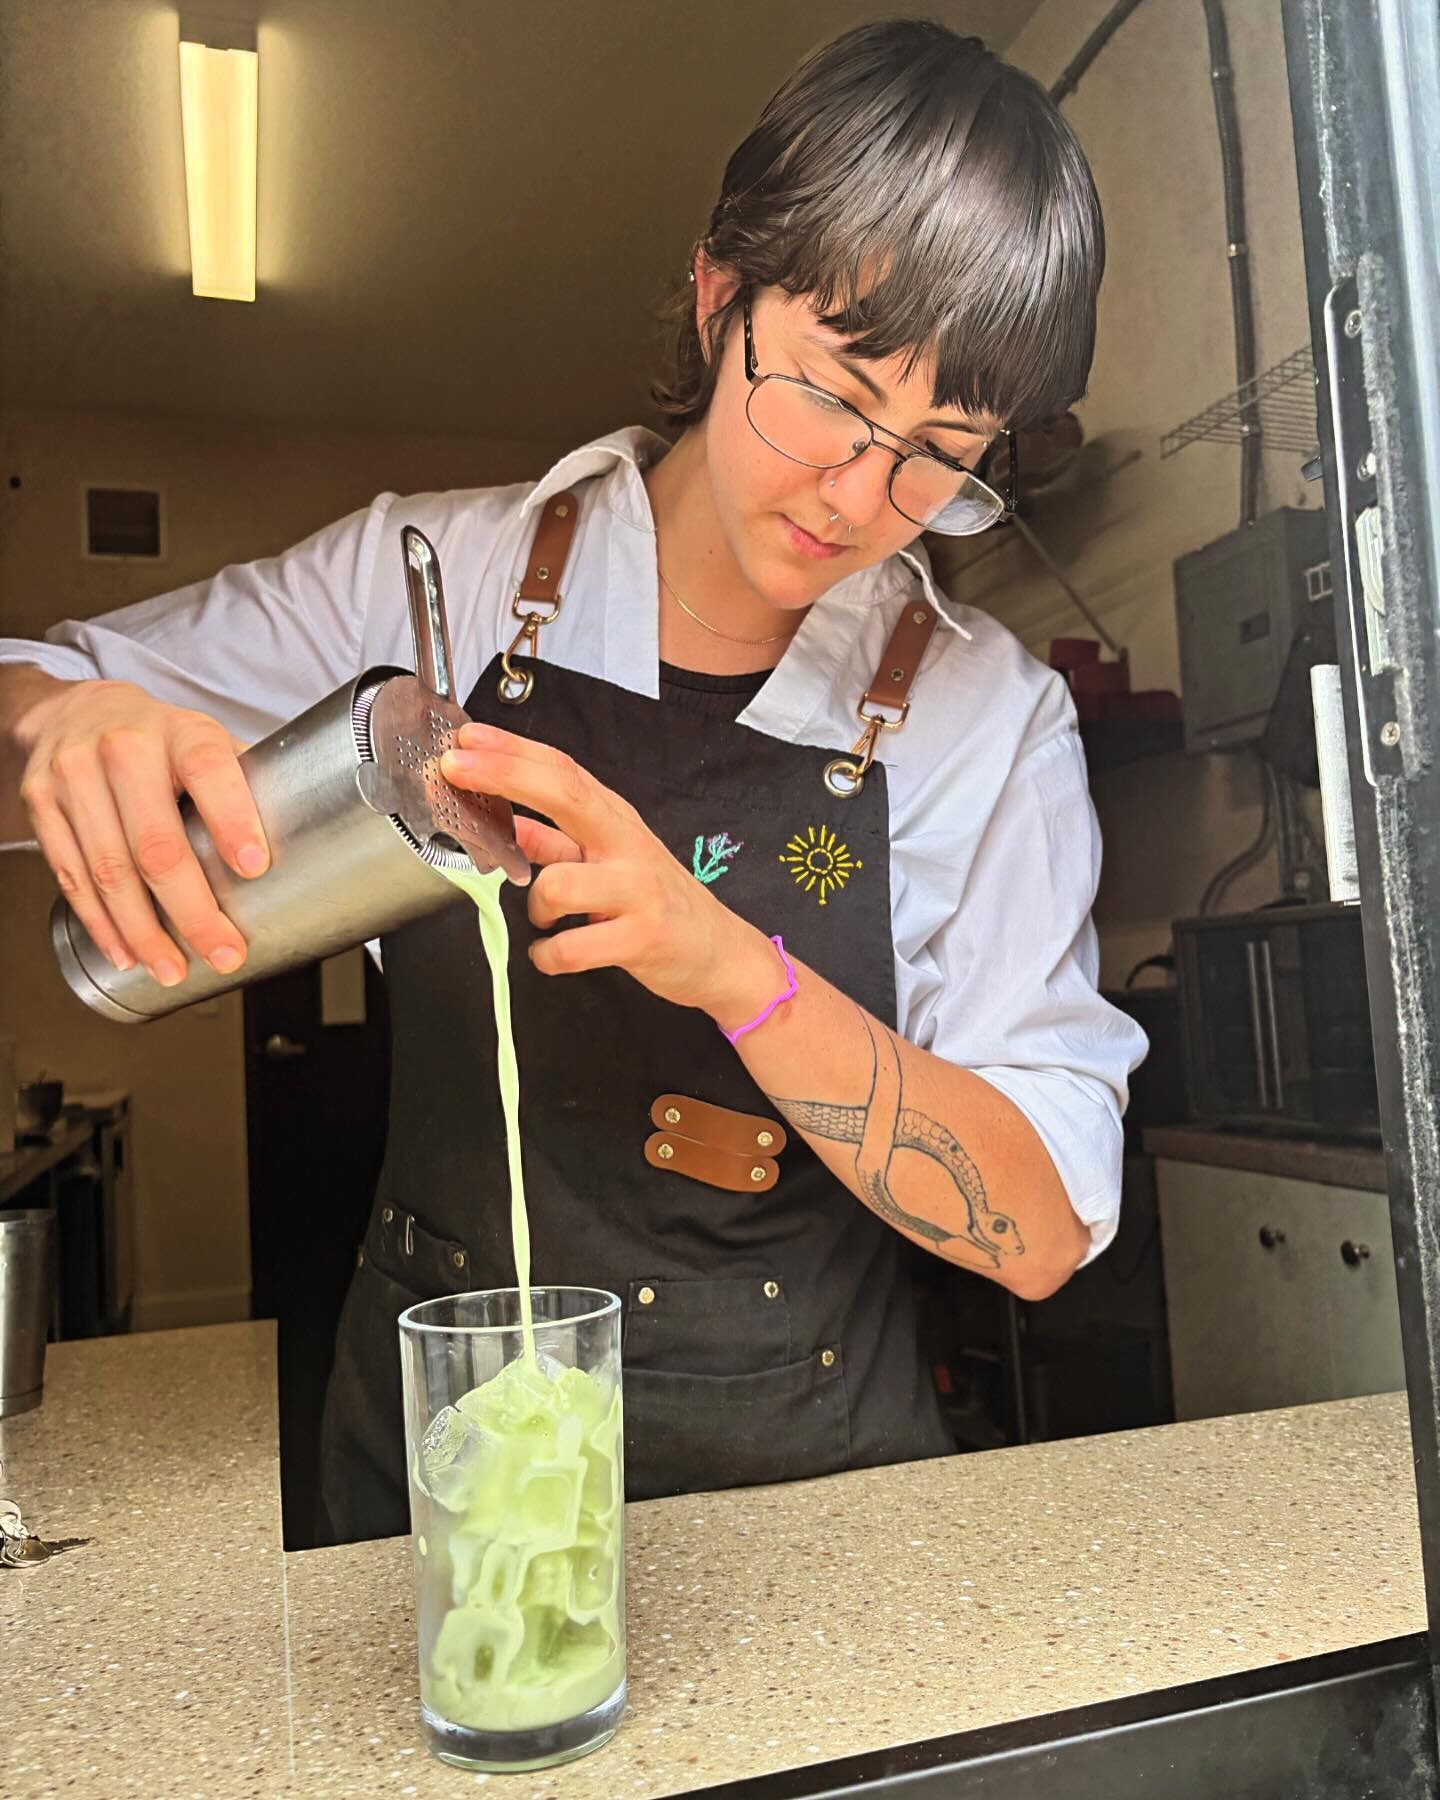 Here&rsquo;s to Cloey; the cleanest barista we&rsquo;ve ever met! Want to chat about your favorite book? Strike up a conversation with Cloey. Need advice on plant propagation? Come see Cloey. Whatever your conversational or caffeine needs may be, Clo